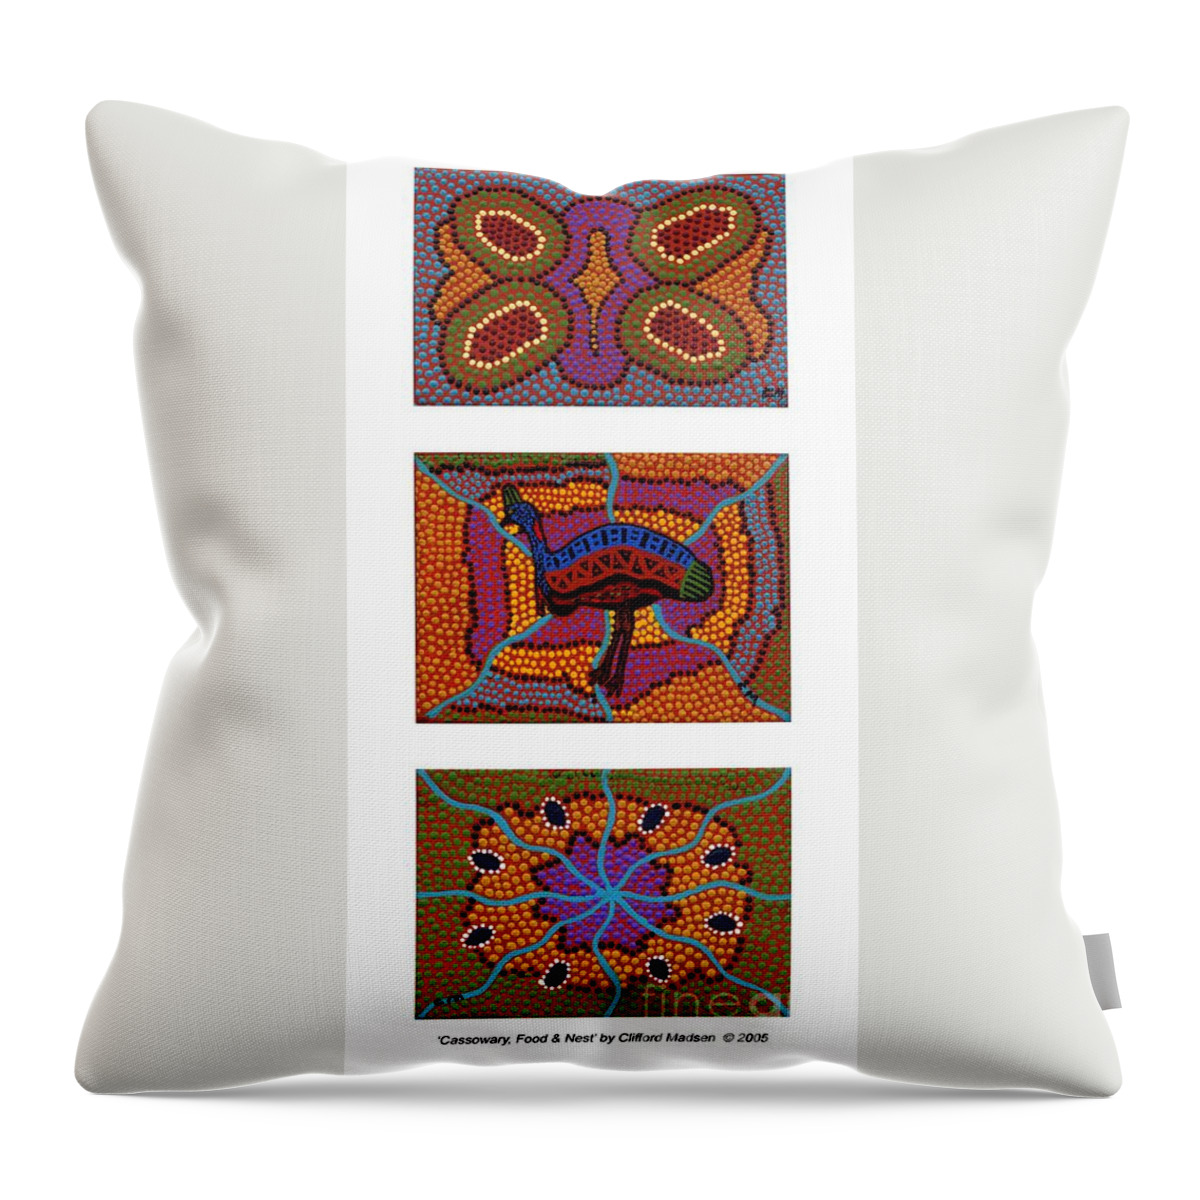 Cassowary Throw Pillow featuring the painting Cassowary - Food - Nest by Clifford Madsen